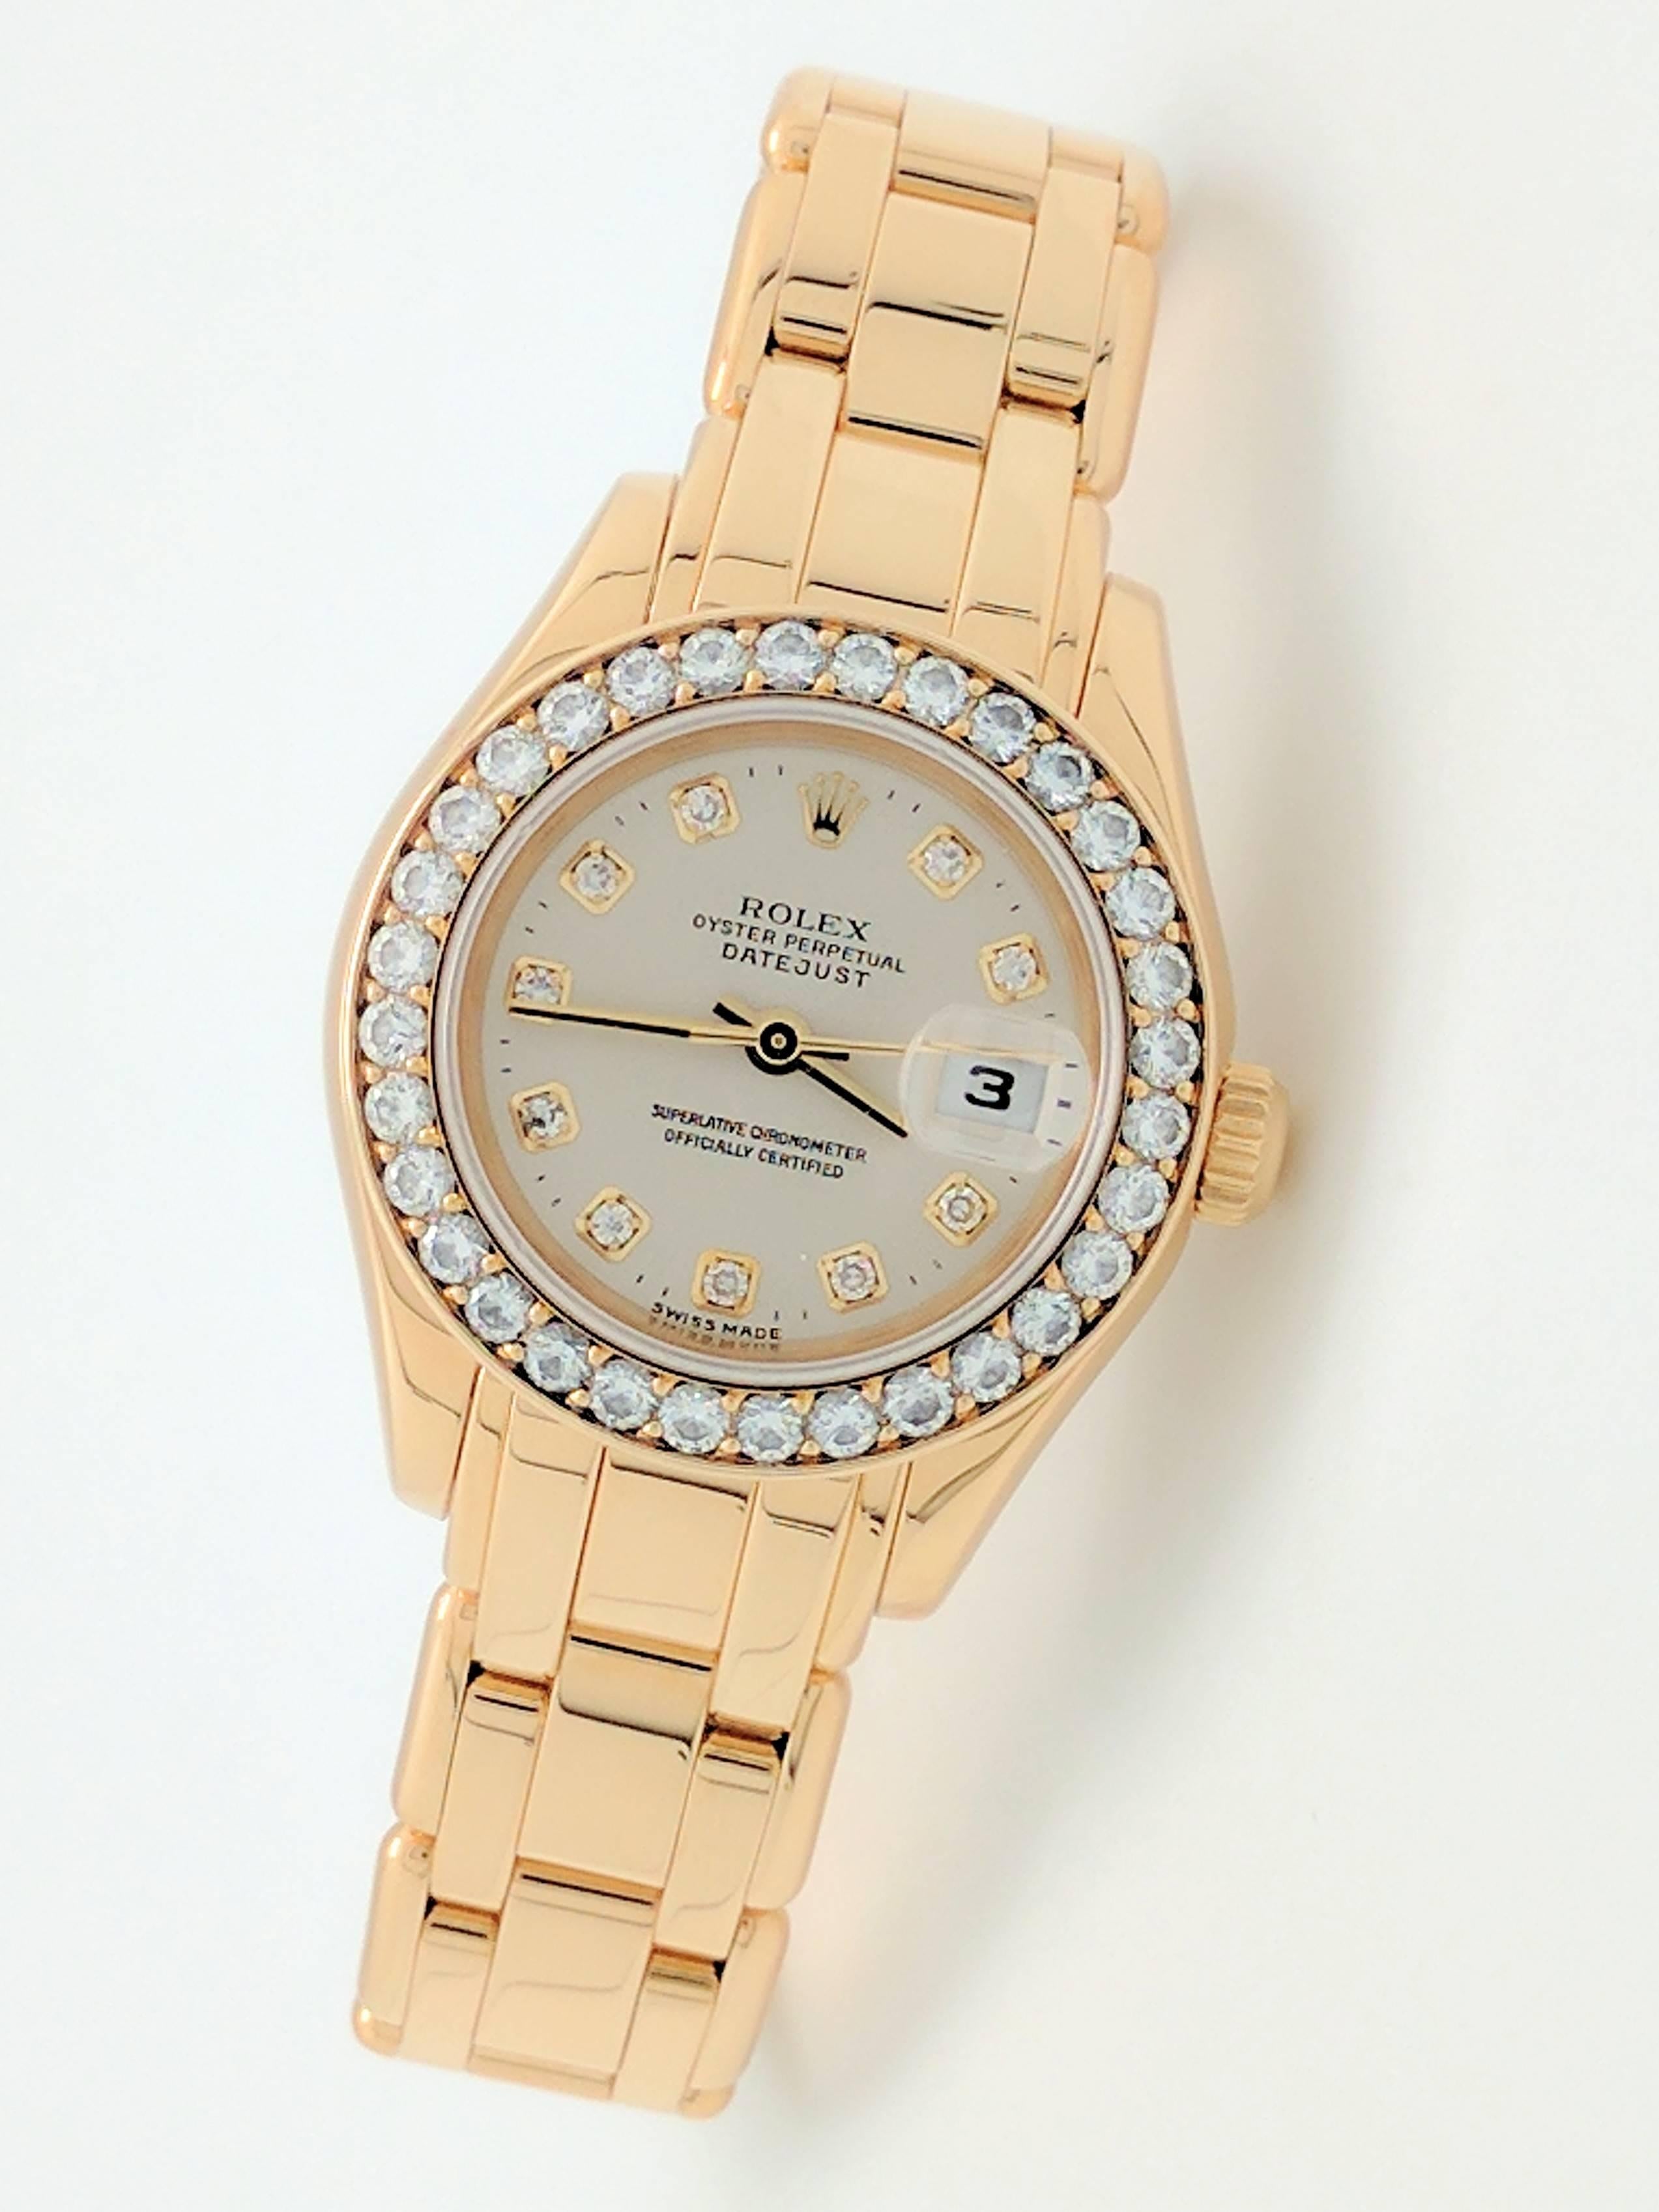 You are viewing an Authentic and all original Rolex 18KYG Pearlmaster ladies Watch. Model: 69298  Serial: "W" (1995).

This watch is automatic with a date and features a beautiful original Rolex silver dial with diamond markers and gold